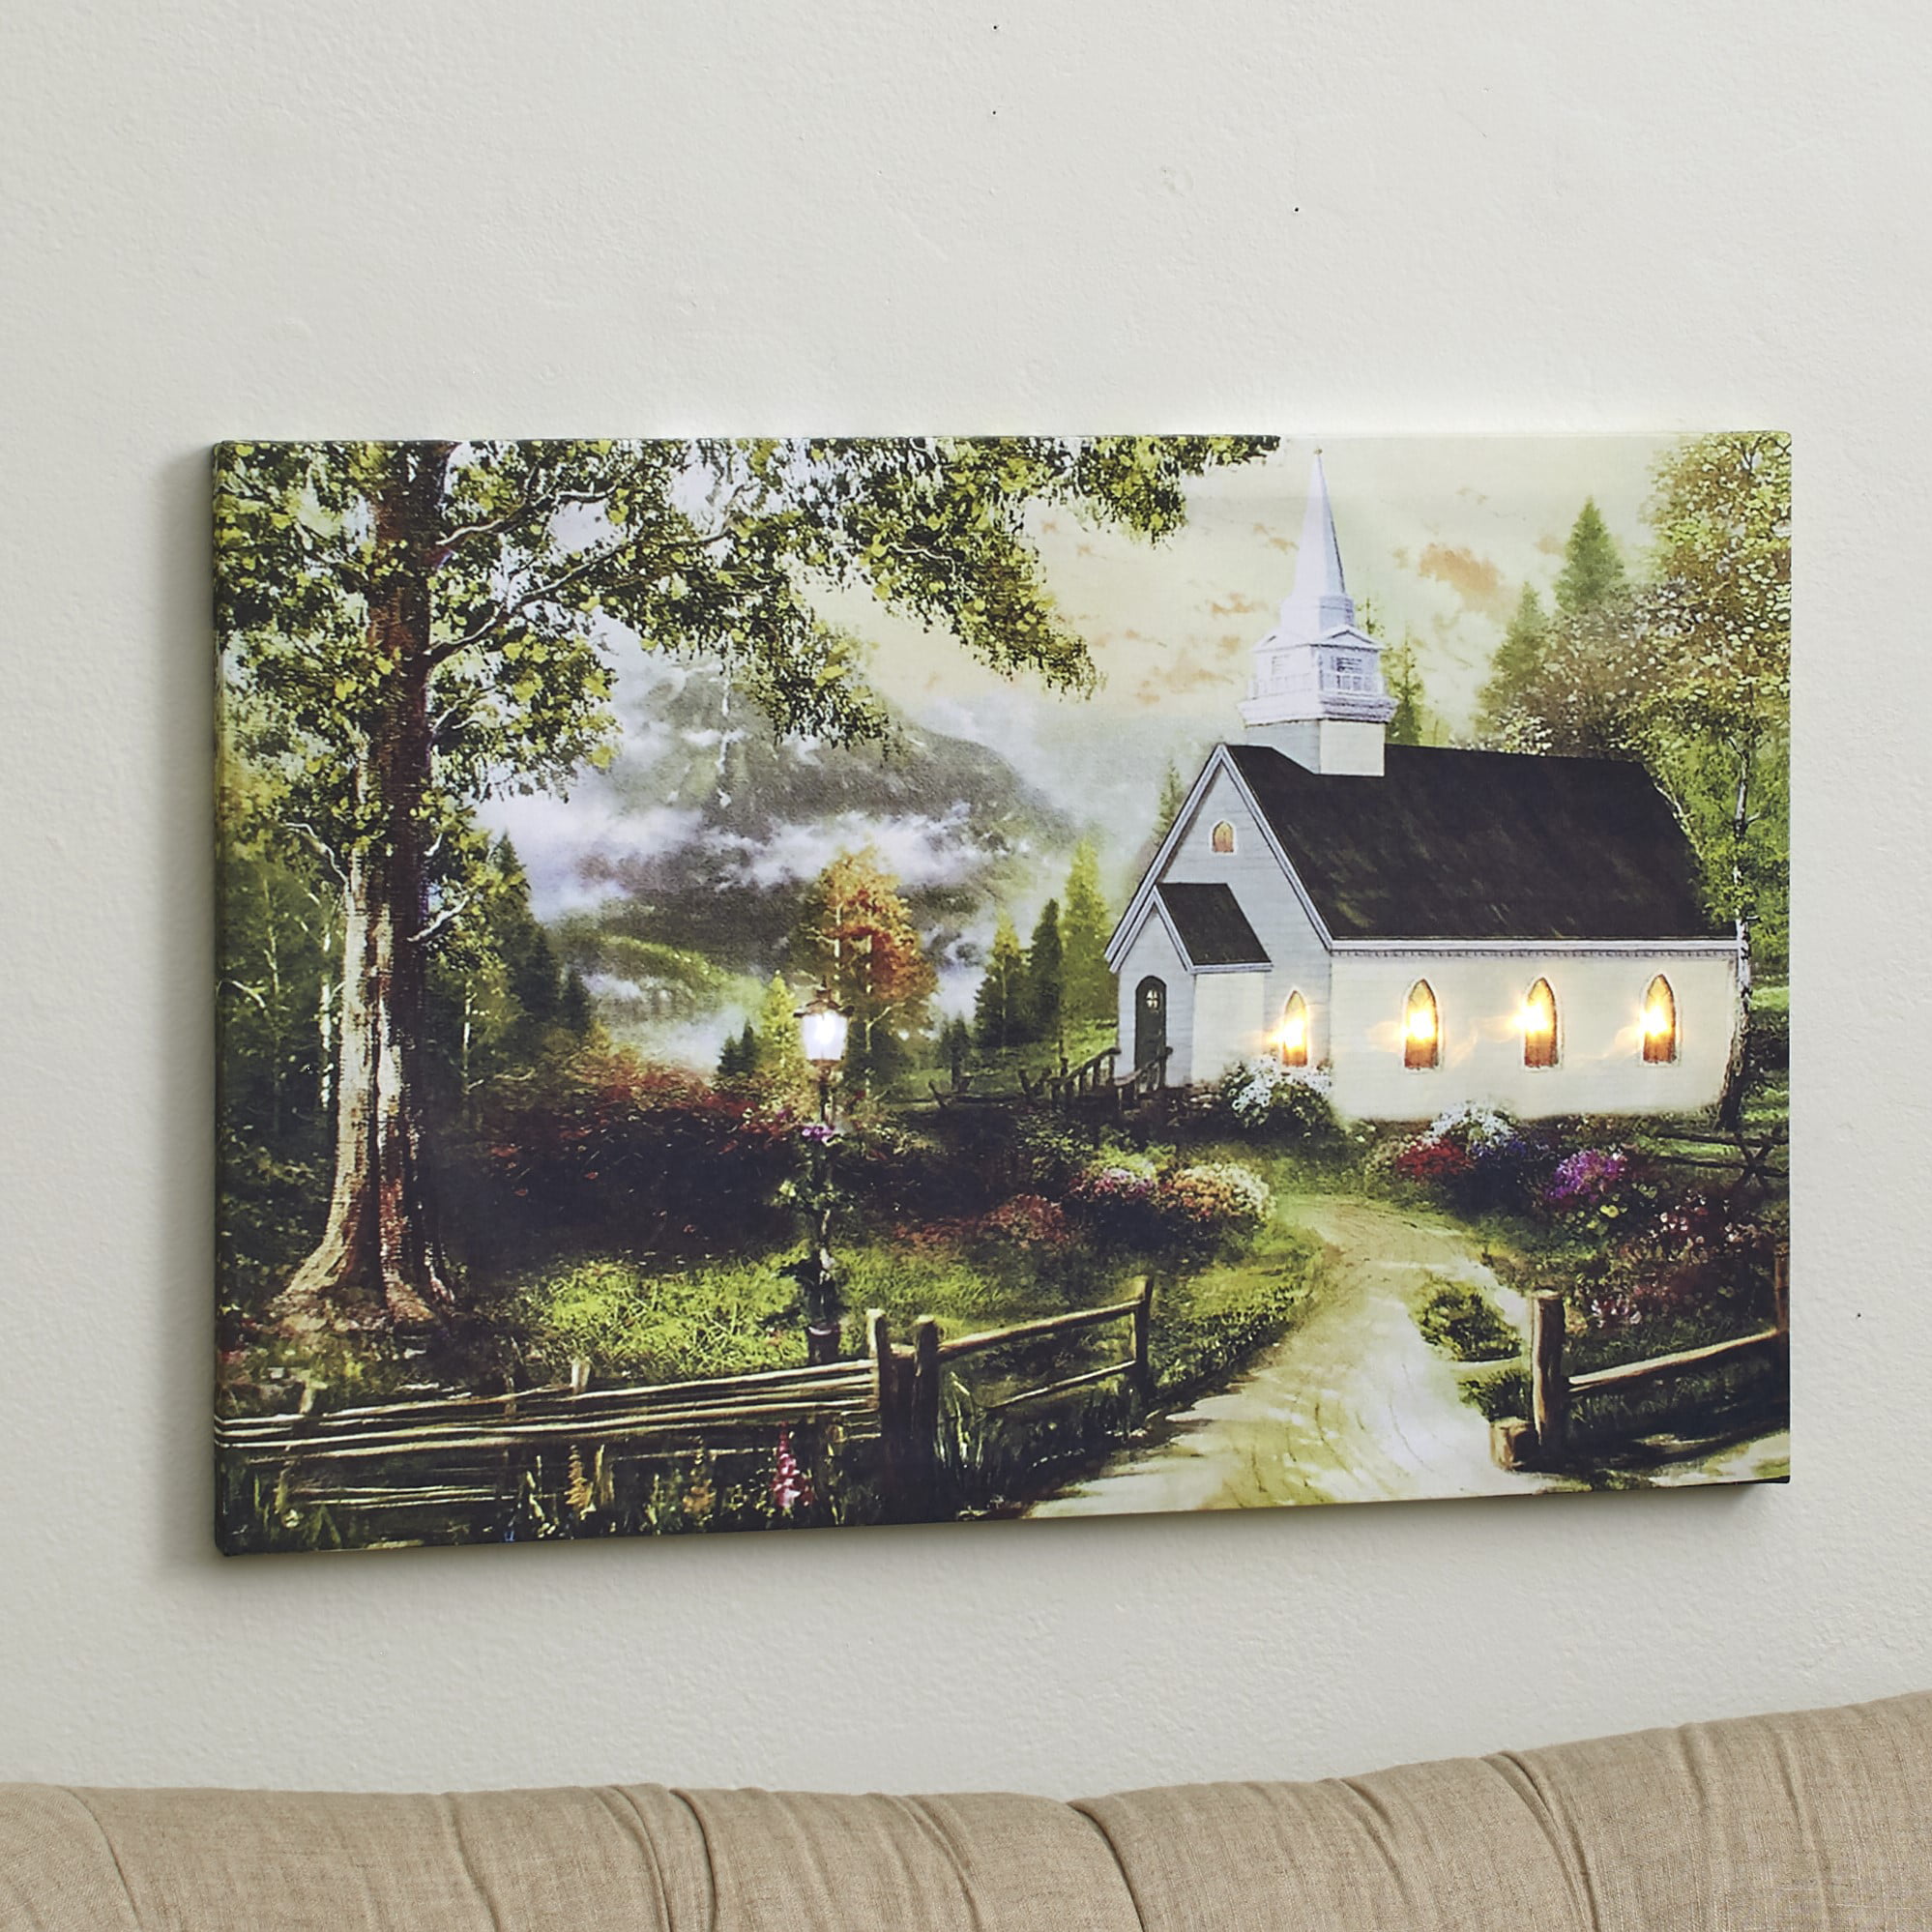 Lighted Church Picture BANBERRY DESIGNS Church Canvas Print LED Lighted Picture with a Window Frame Border and A County Church Setting 